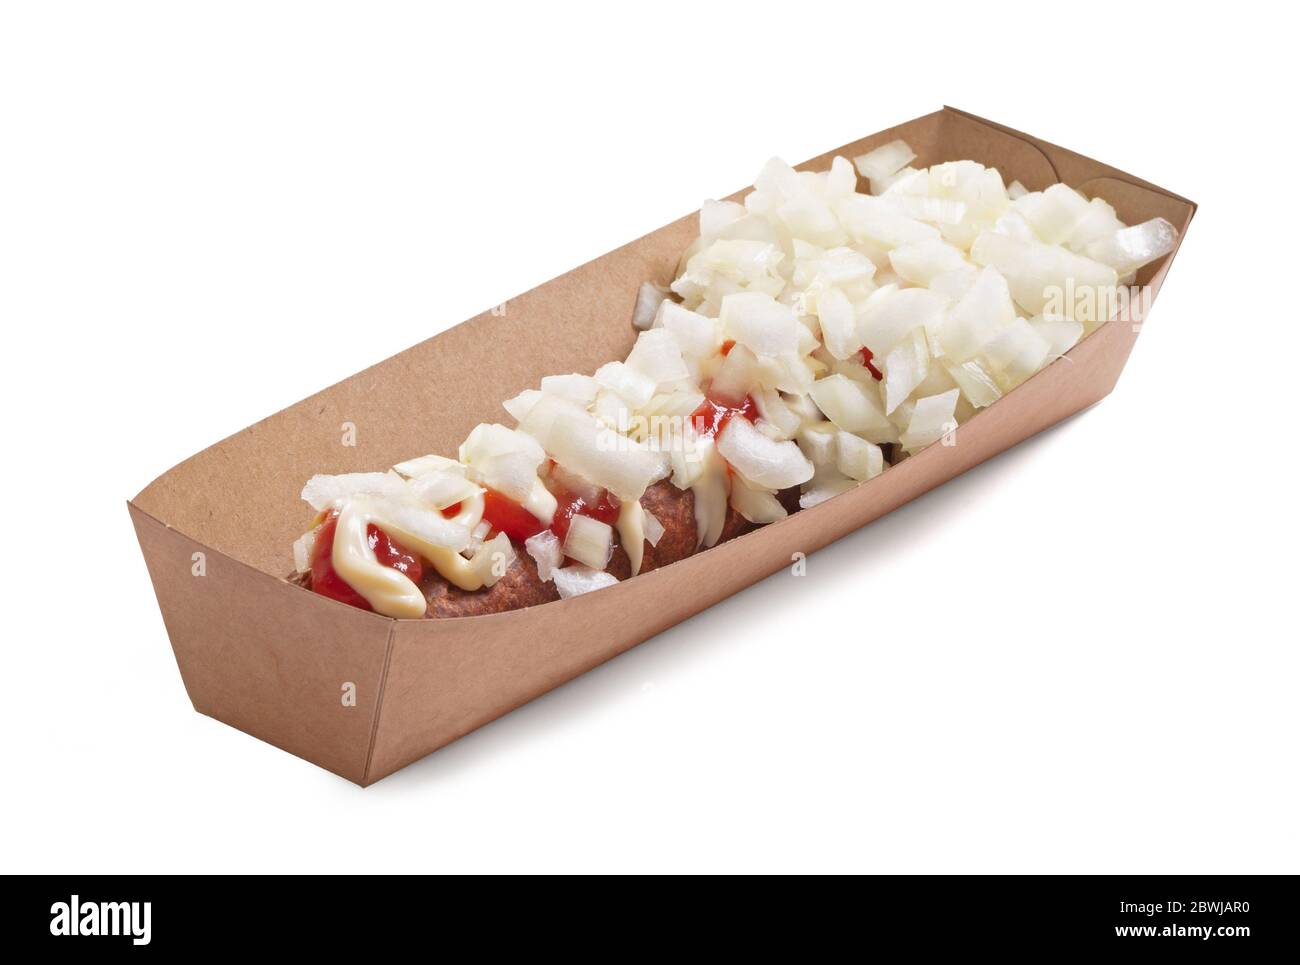 One frikadel with ketchup, mayonnaise on chopped onions, a Dutch fast food snack called 'frikadel speciaal', the Netherlands Stock Photo